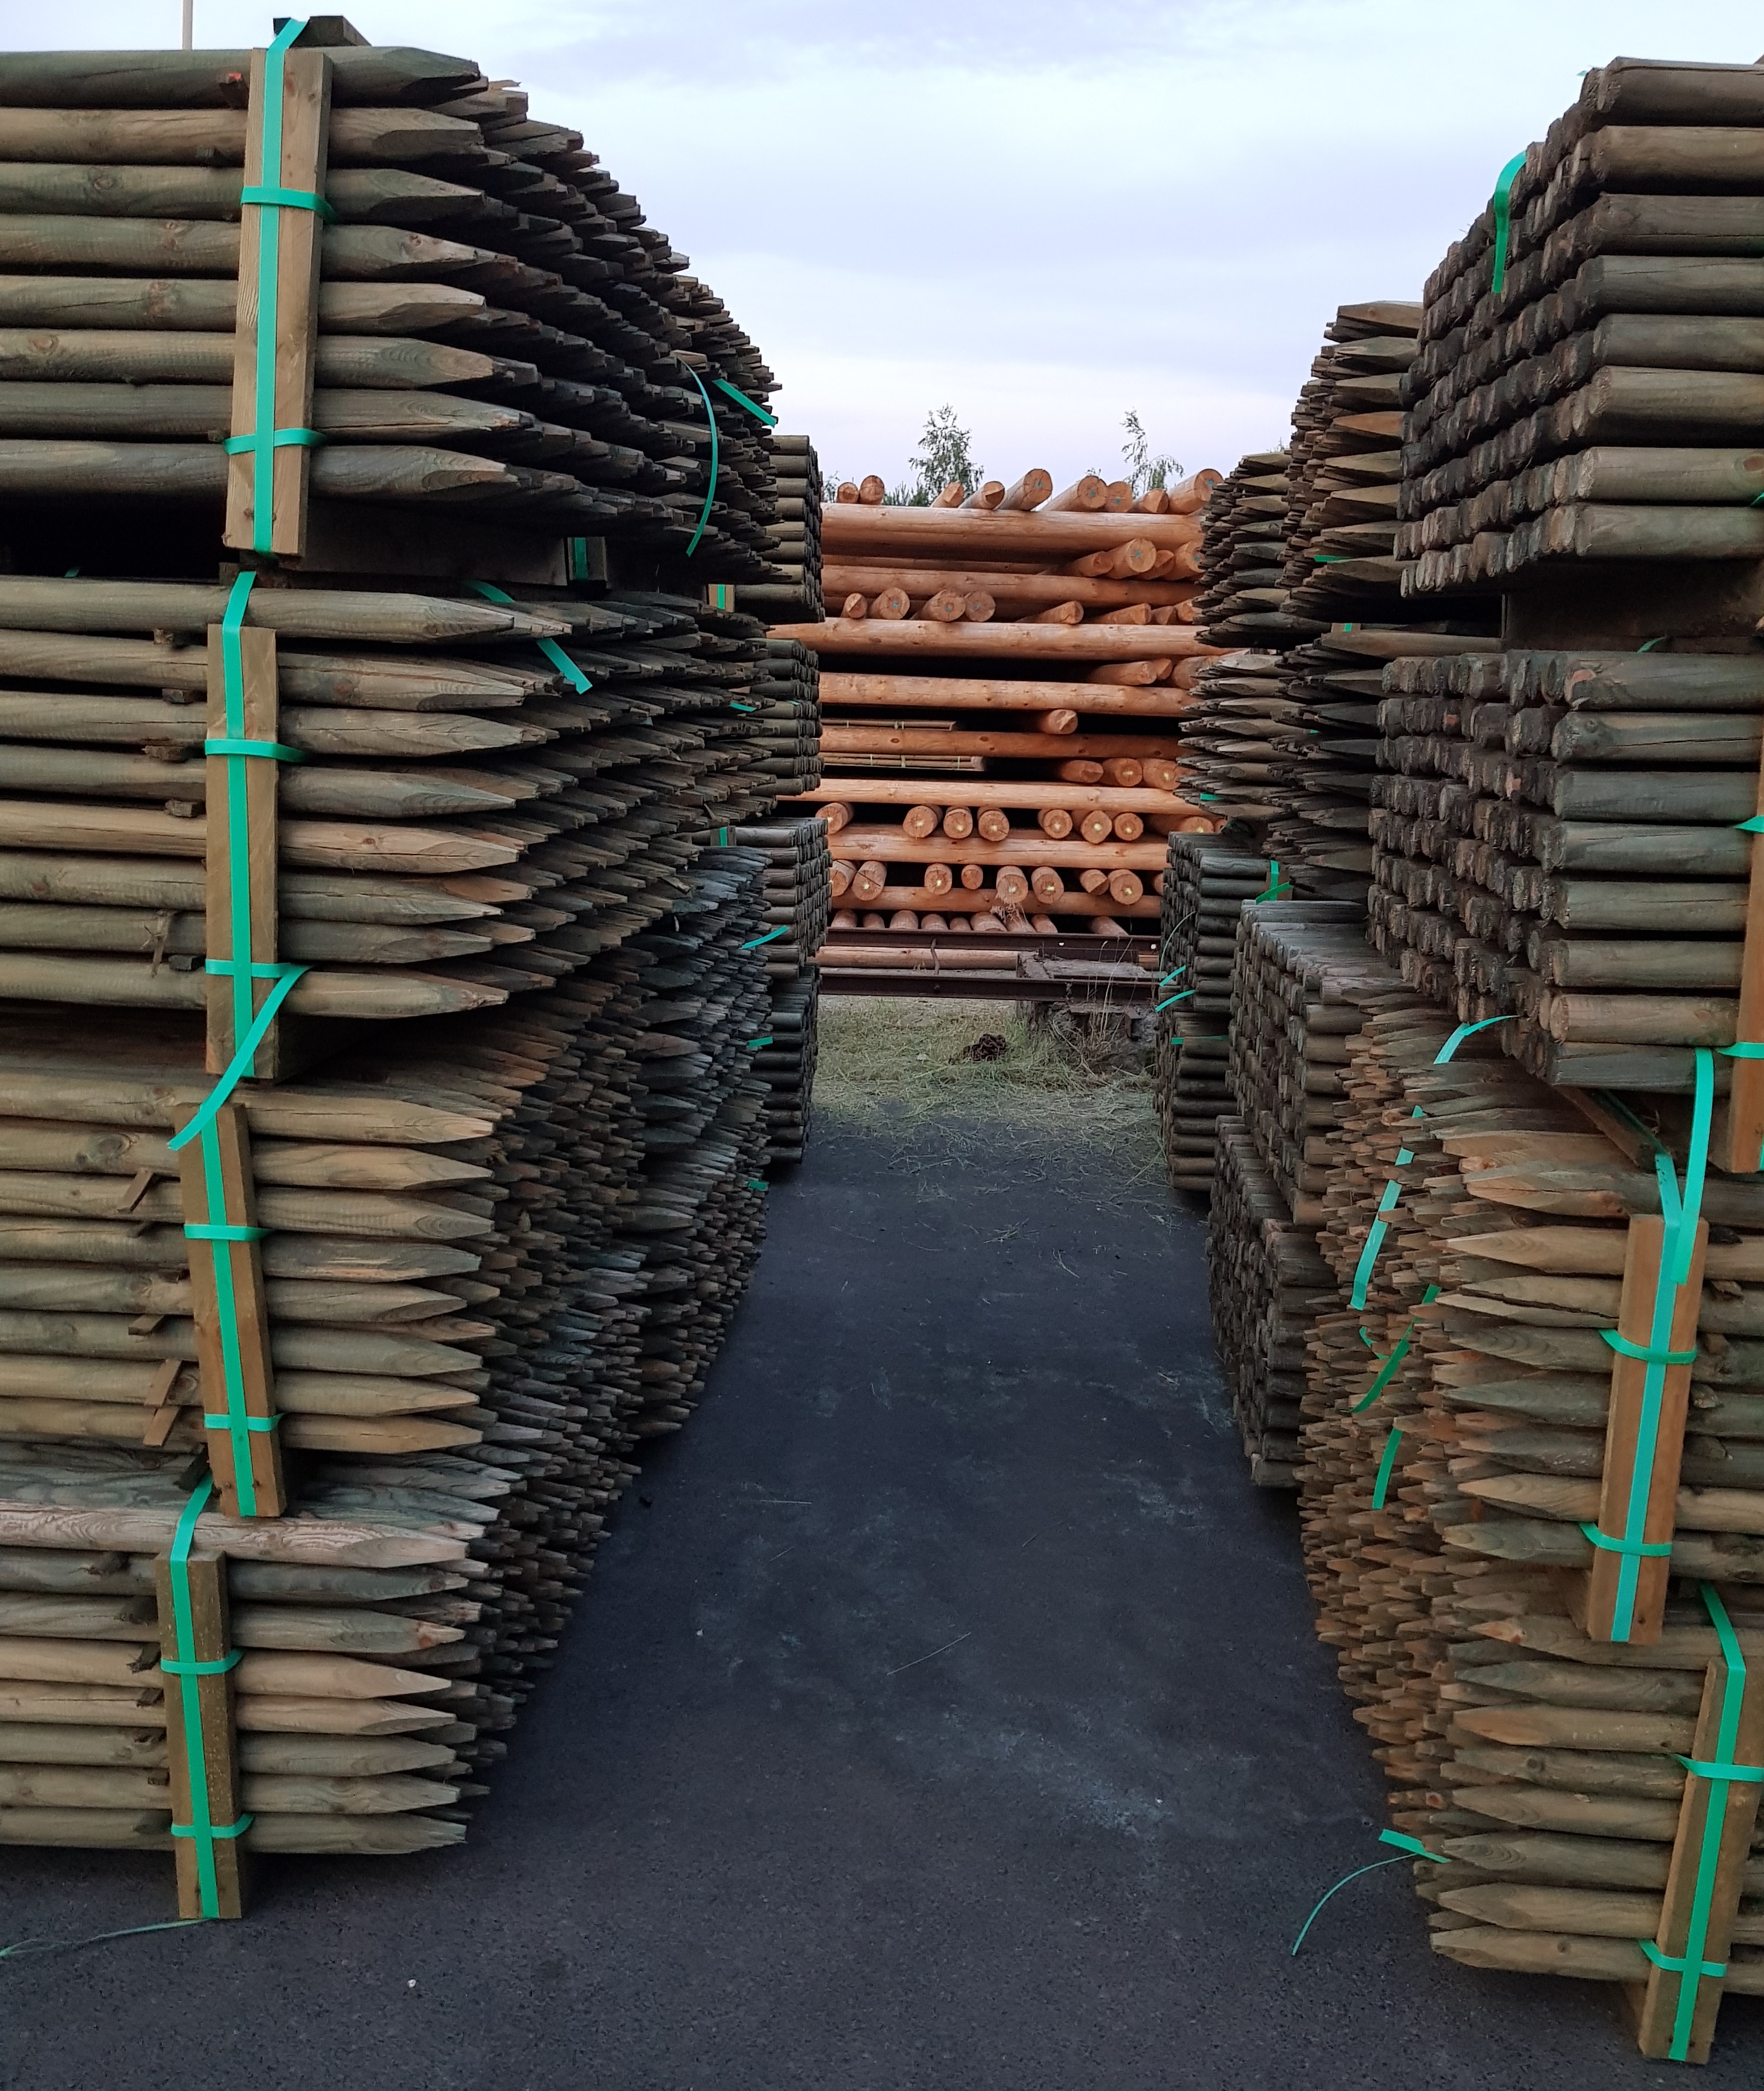 Pine Electrical Poles Timber From Poland with vacuum pressure impregnation treatment British Standard